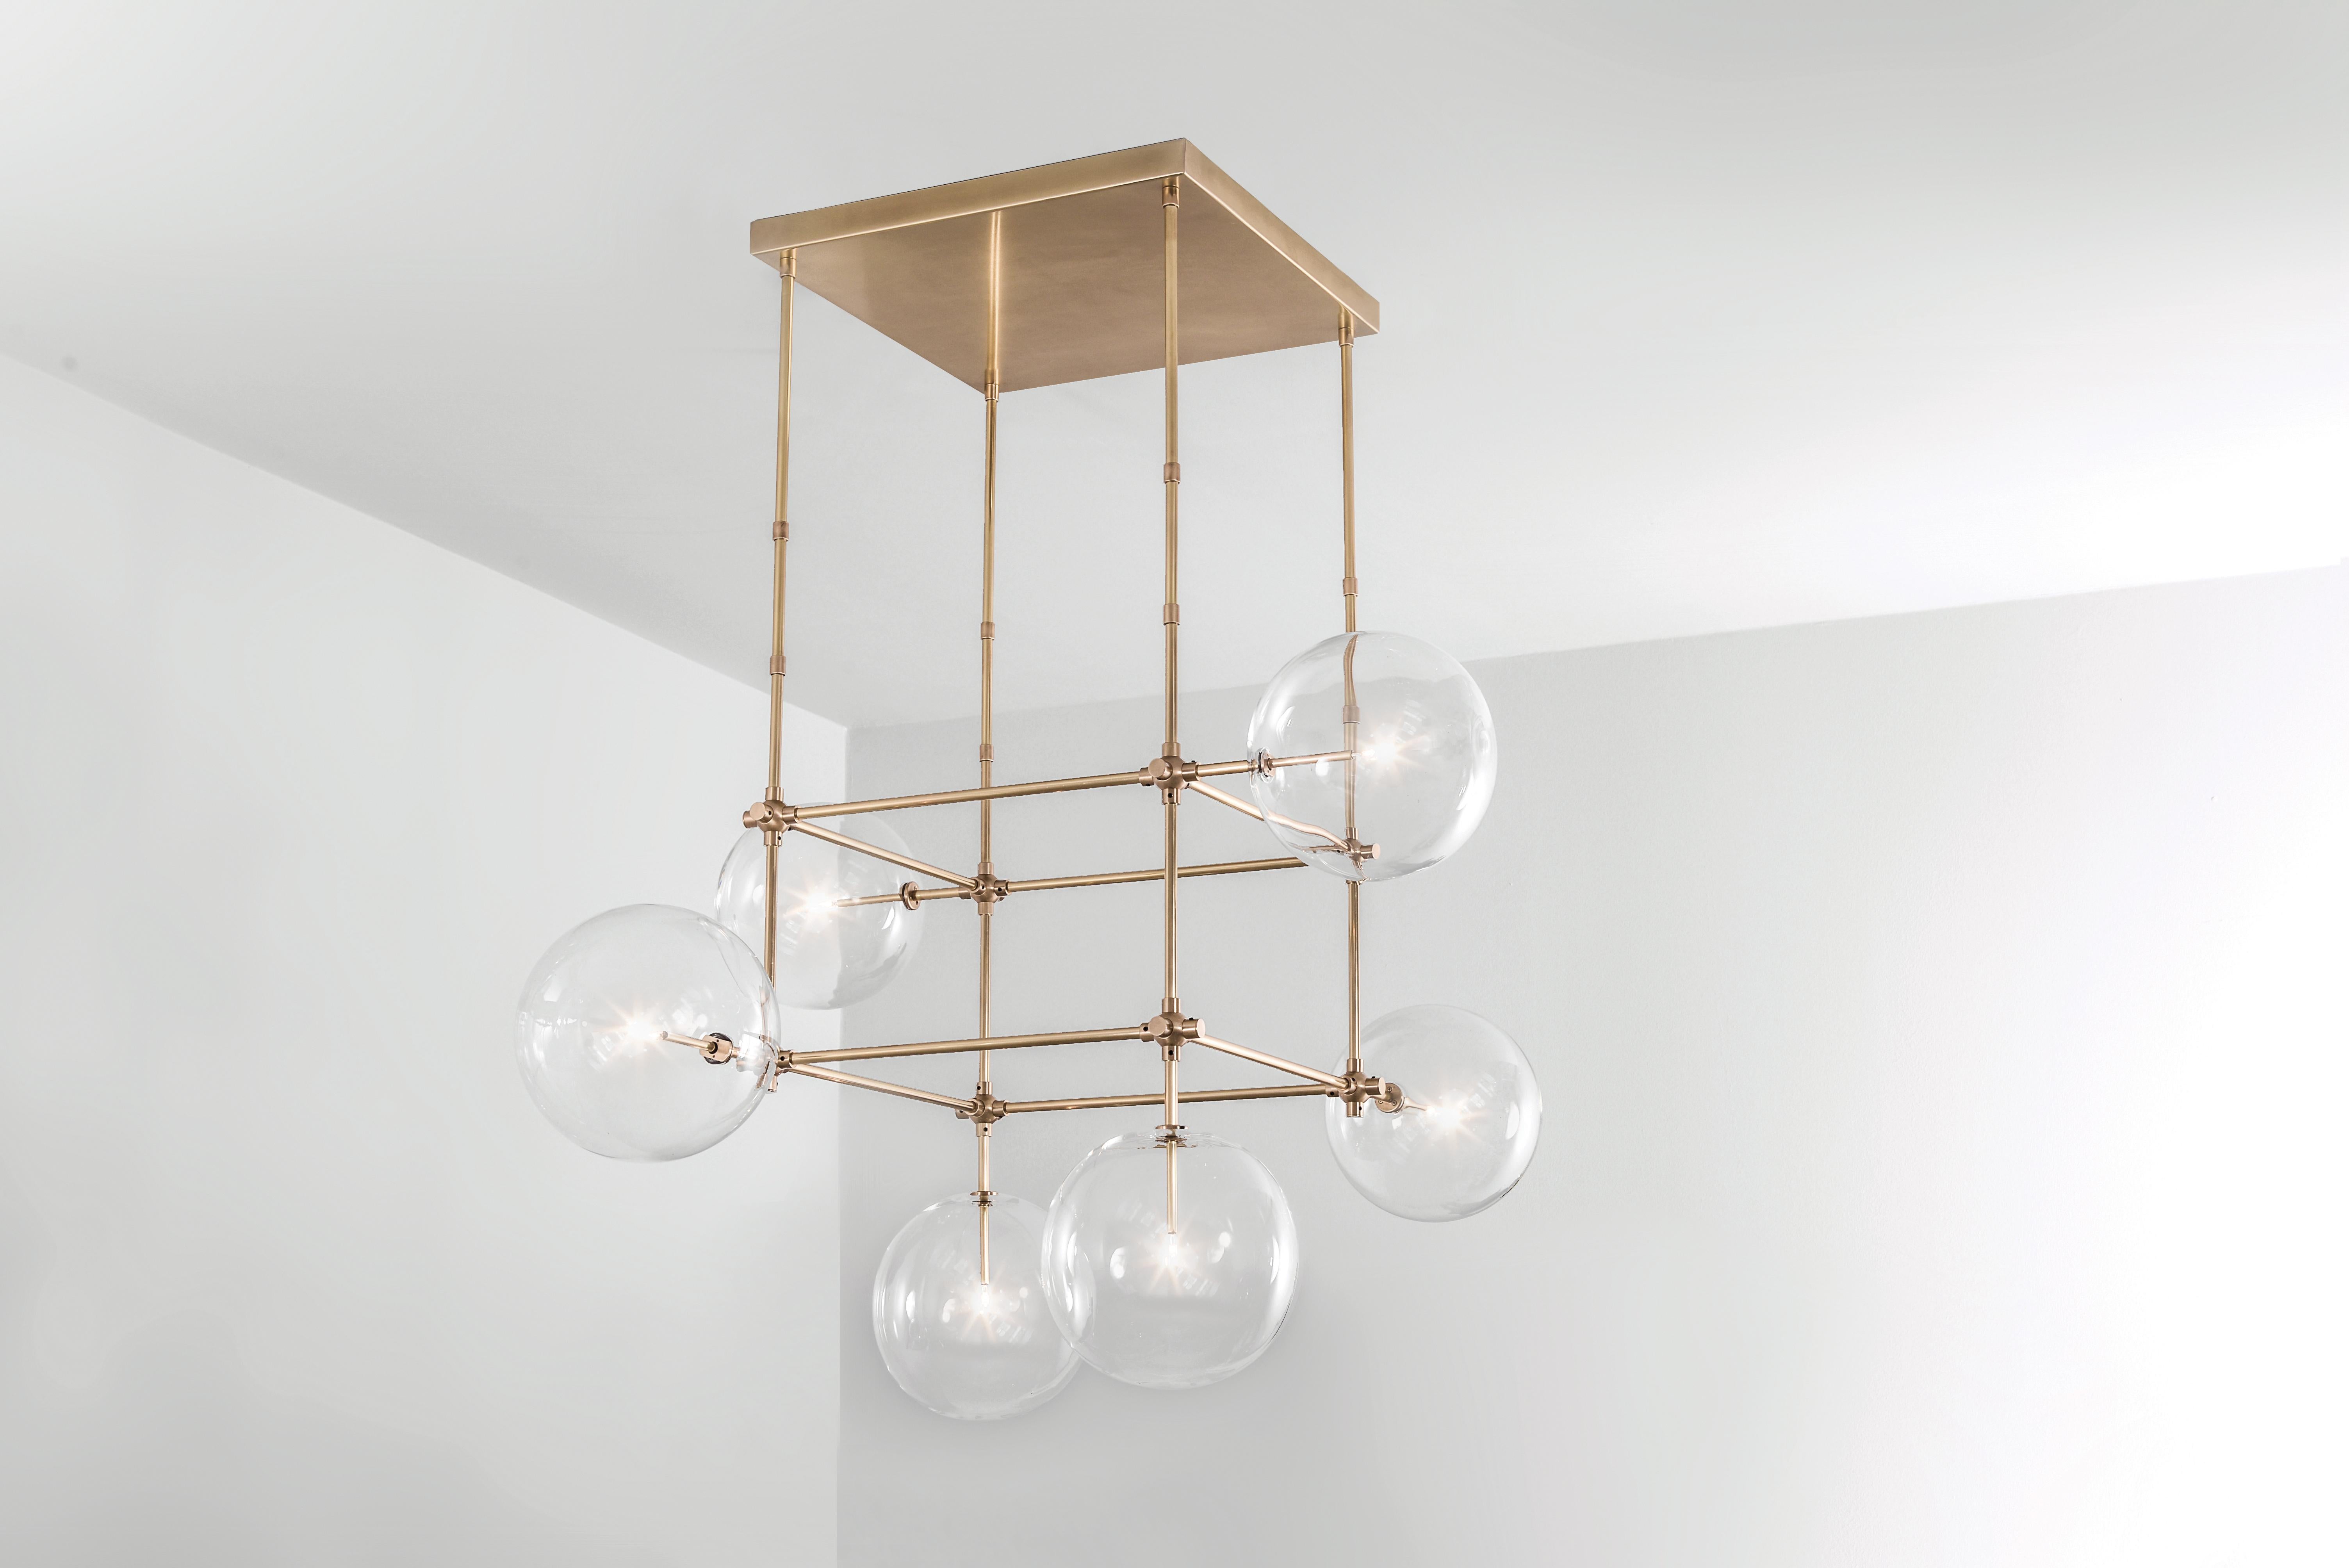 Soap 6 DT Brass Chandelier by Schwung
Dimensions: W 117 x D 117 x H 128 cm
Materials: Natural brass, hand blown glass globes

Finishes available: Black gunmetal, polished nickel


Schwung is a German word, and loosely defined, means energy or